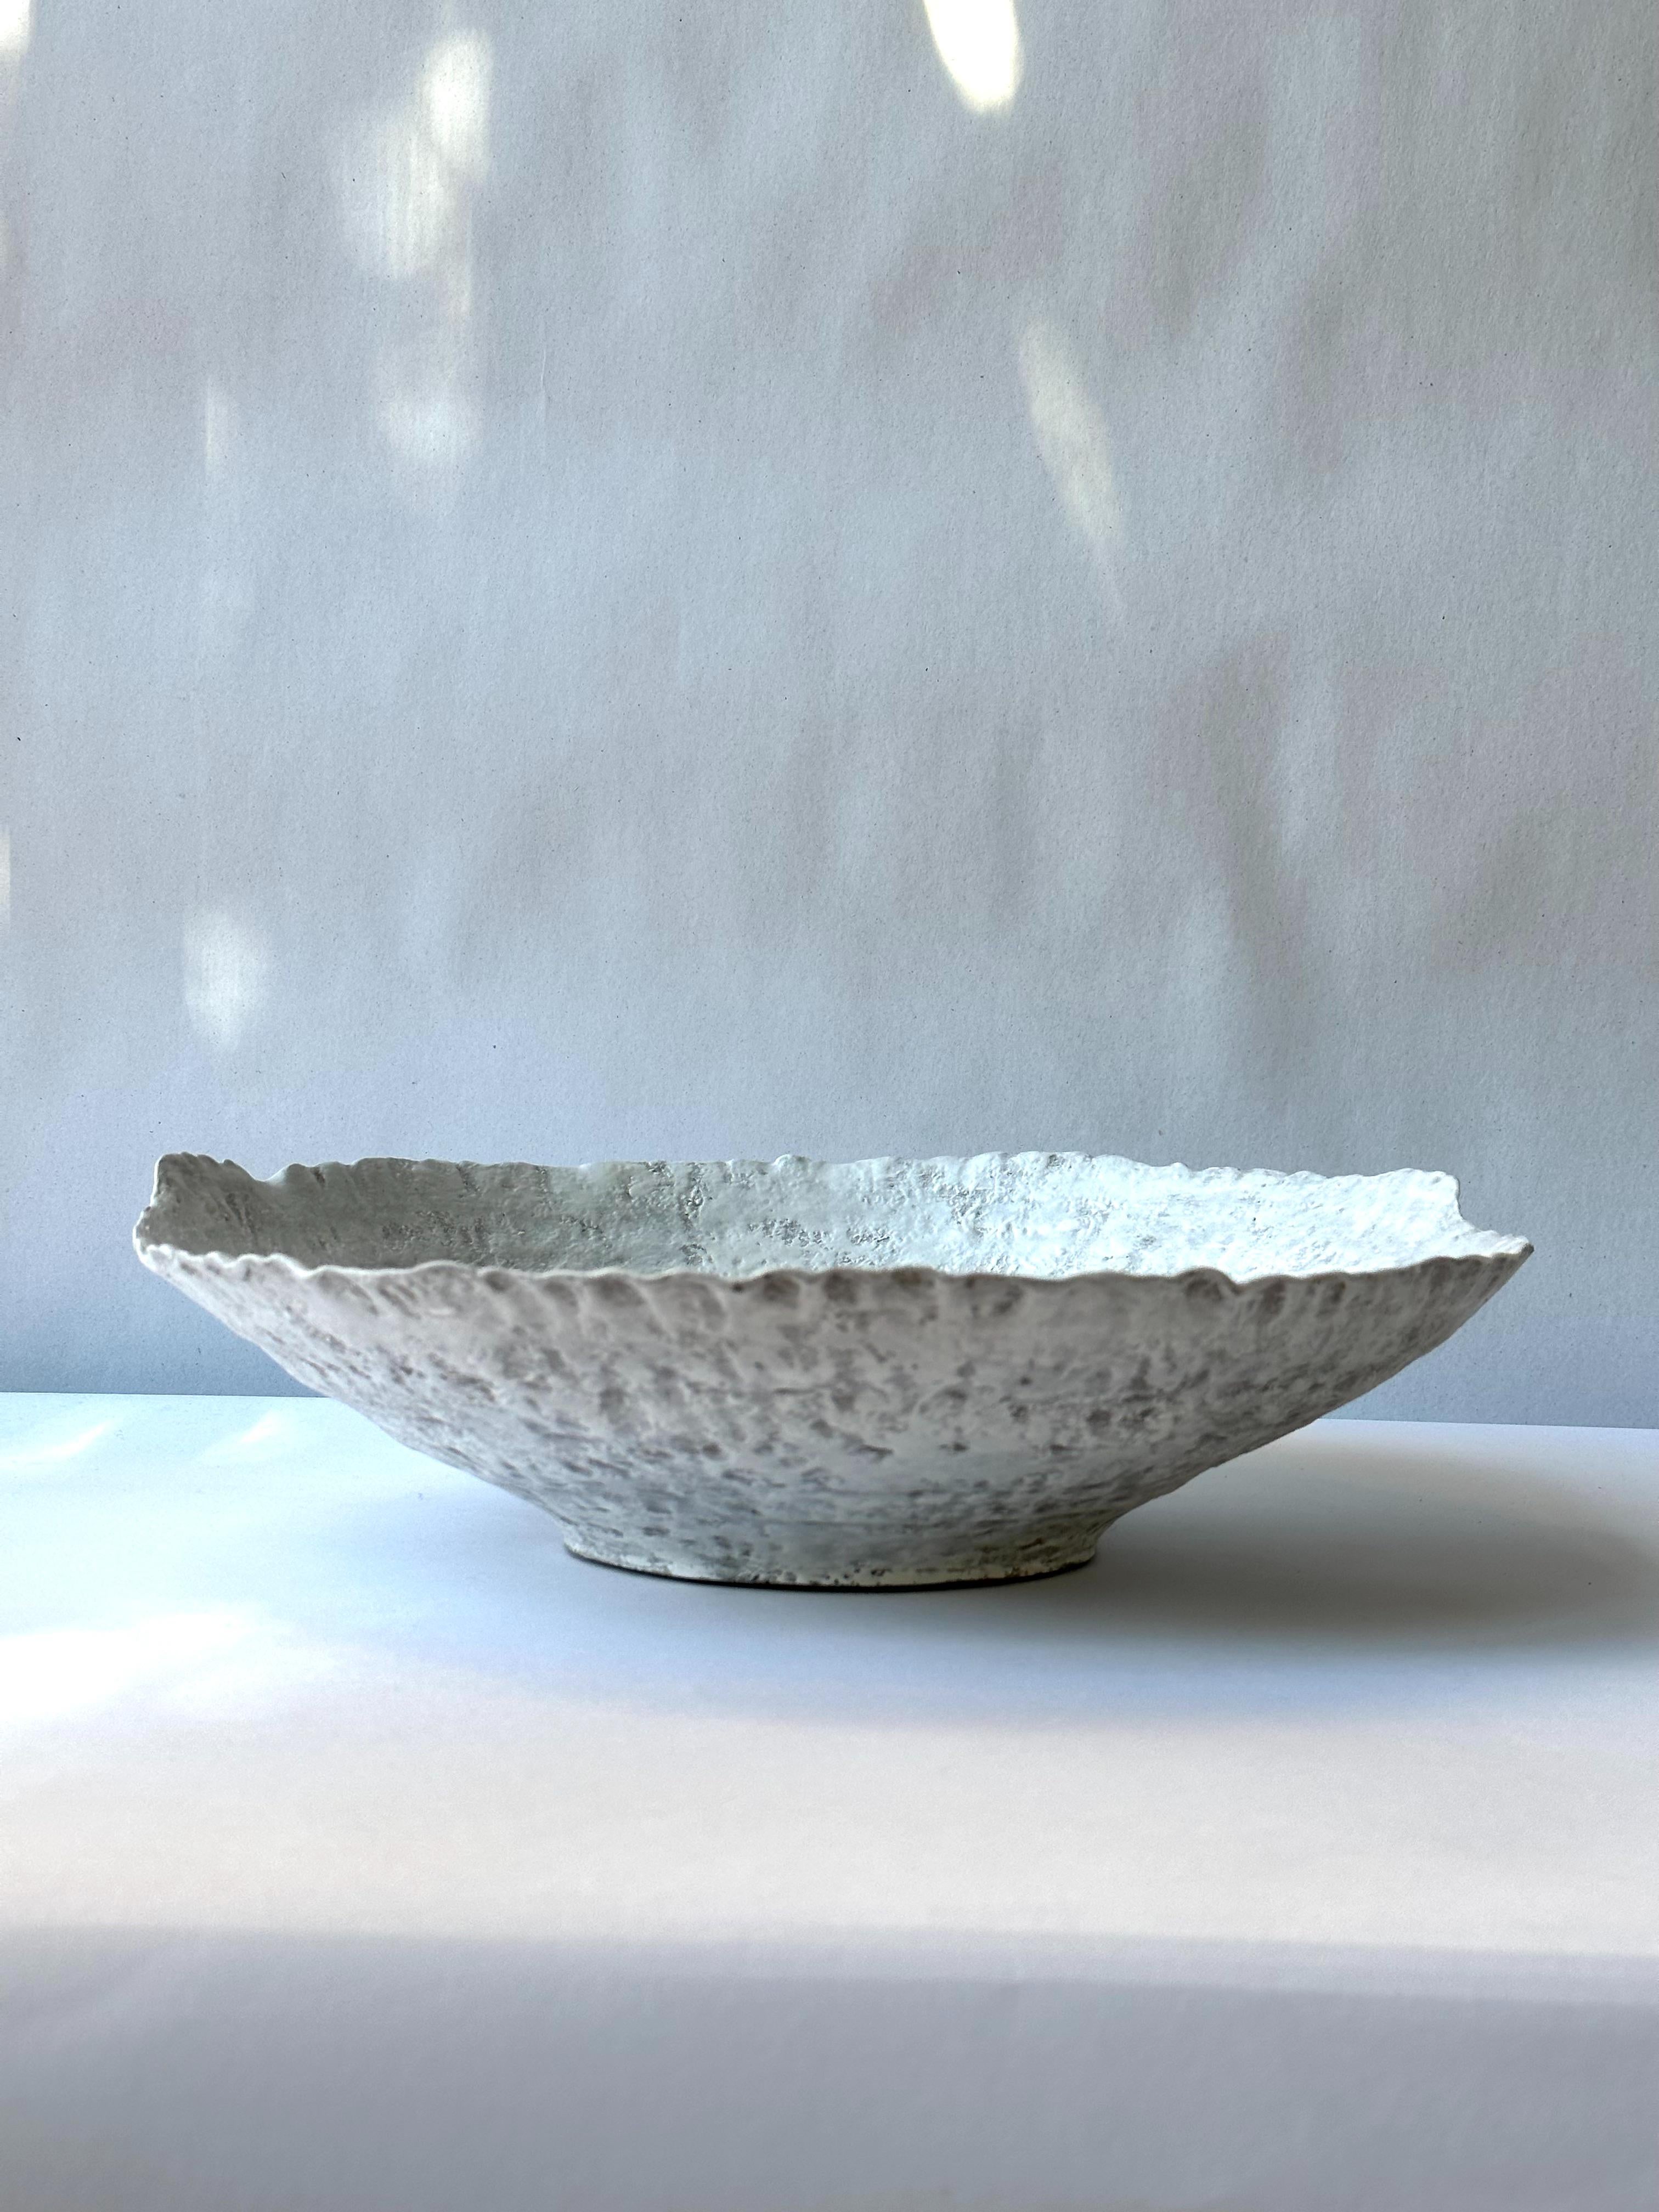 Grey Stoneware Symposio Bowl by Elena Vasilantonaki
Unique
Dimensions: ⌀ 34 x H 10 cm (Dimensions may vary)
Materials: Stoneware
Available finishes: Black, White, Brown, Red, White patina

Growing up in Greece I was surrounded by pottery forms that